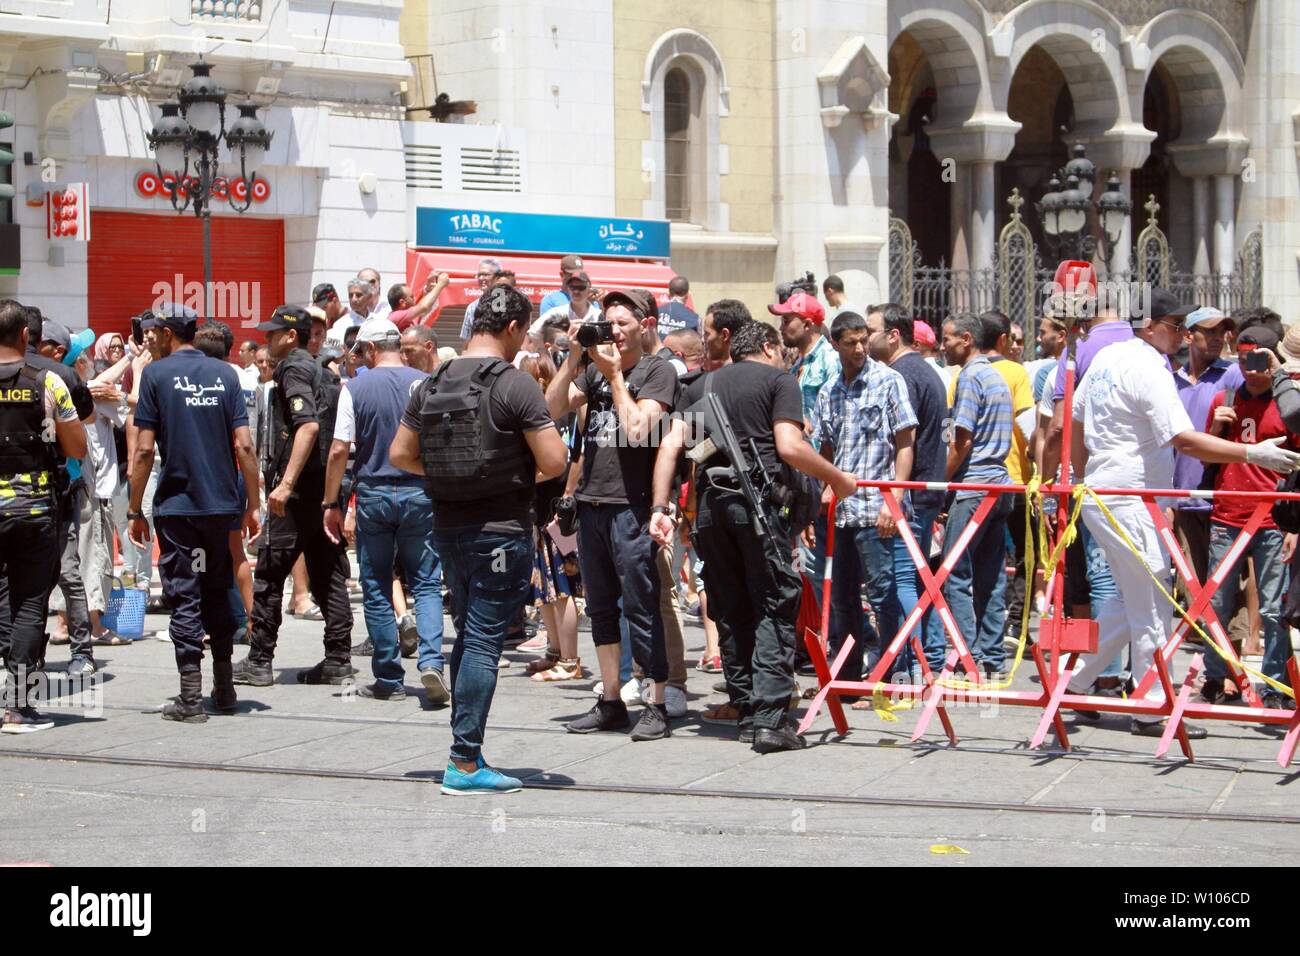 Tunis, Tunisia. 27th June, 2019. A suicide bombing took place on Thursday in downtown Tunis, killing at least five people, including two policemen and three civilians, the Interior Ministry said in a statement.The Interior Ministry reports that the attack took place at 10:50 am (0950 GMT) near a police patrol at Charles De Gaulle Street.According to testimonies collected, hot, with eyewitnesses, a Kamikaze blew himself up near a police vehicle in the intersection Avenue de France/rue Charles De Gaulle (commonly known by the Arcades), a few minutes meters from the French Embassy. (Credit Im Stock Photo